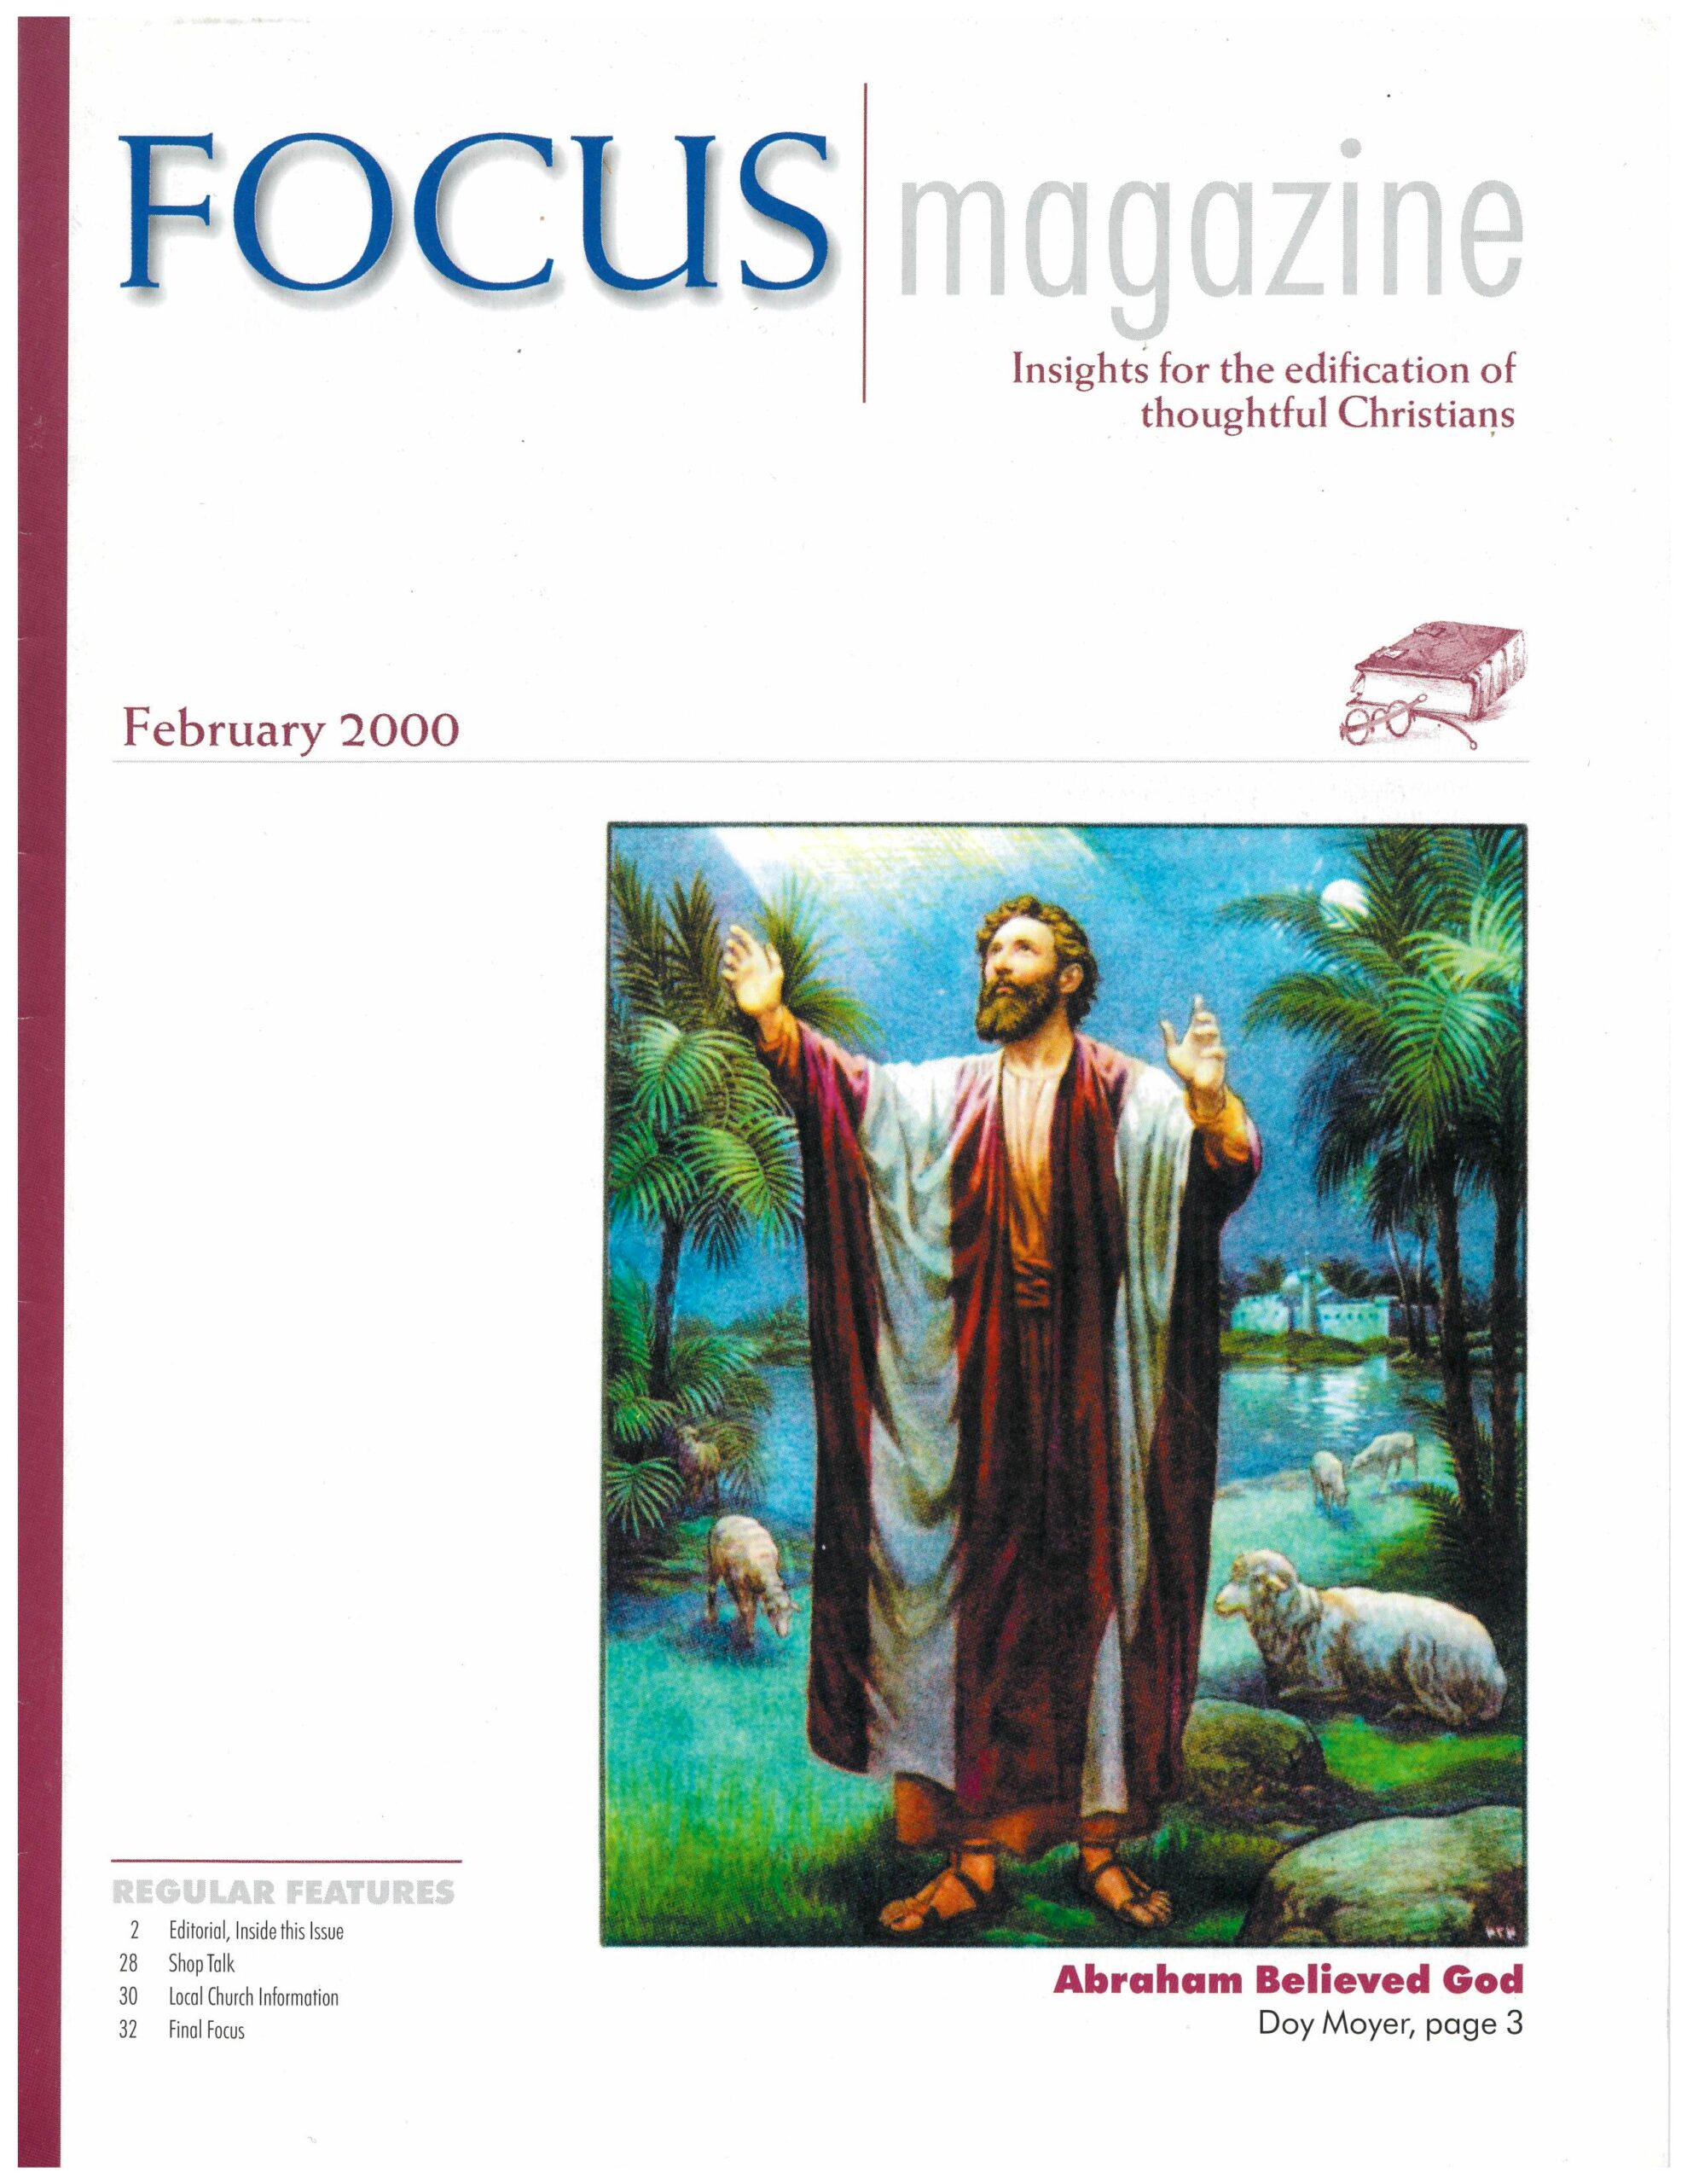 Focus Magazine, February 2000, front cover